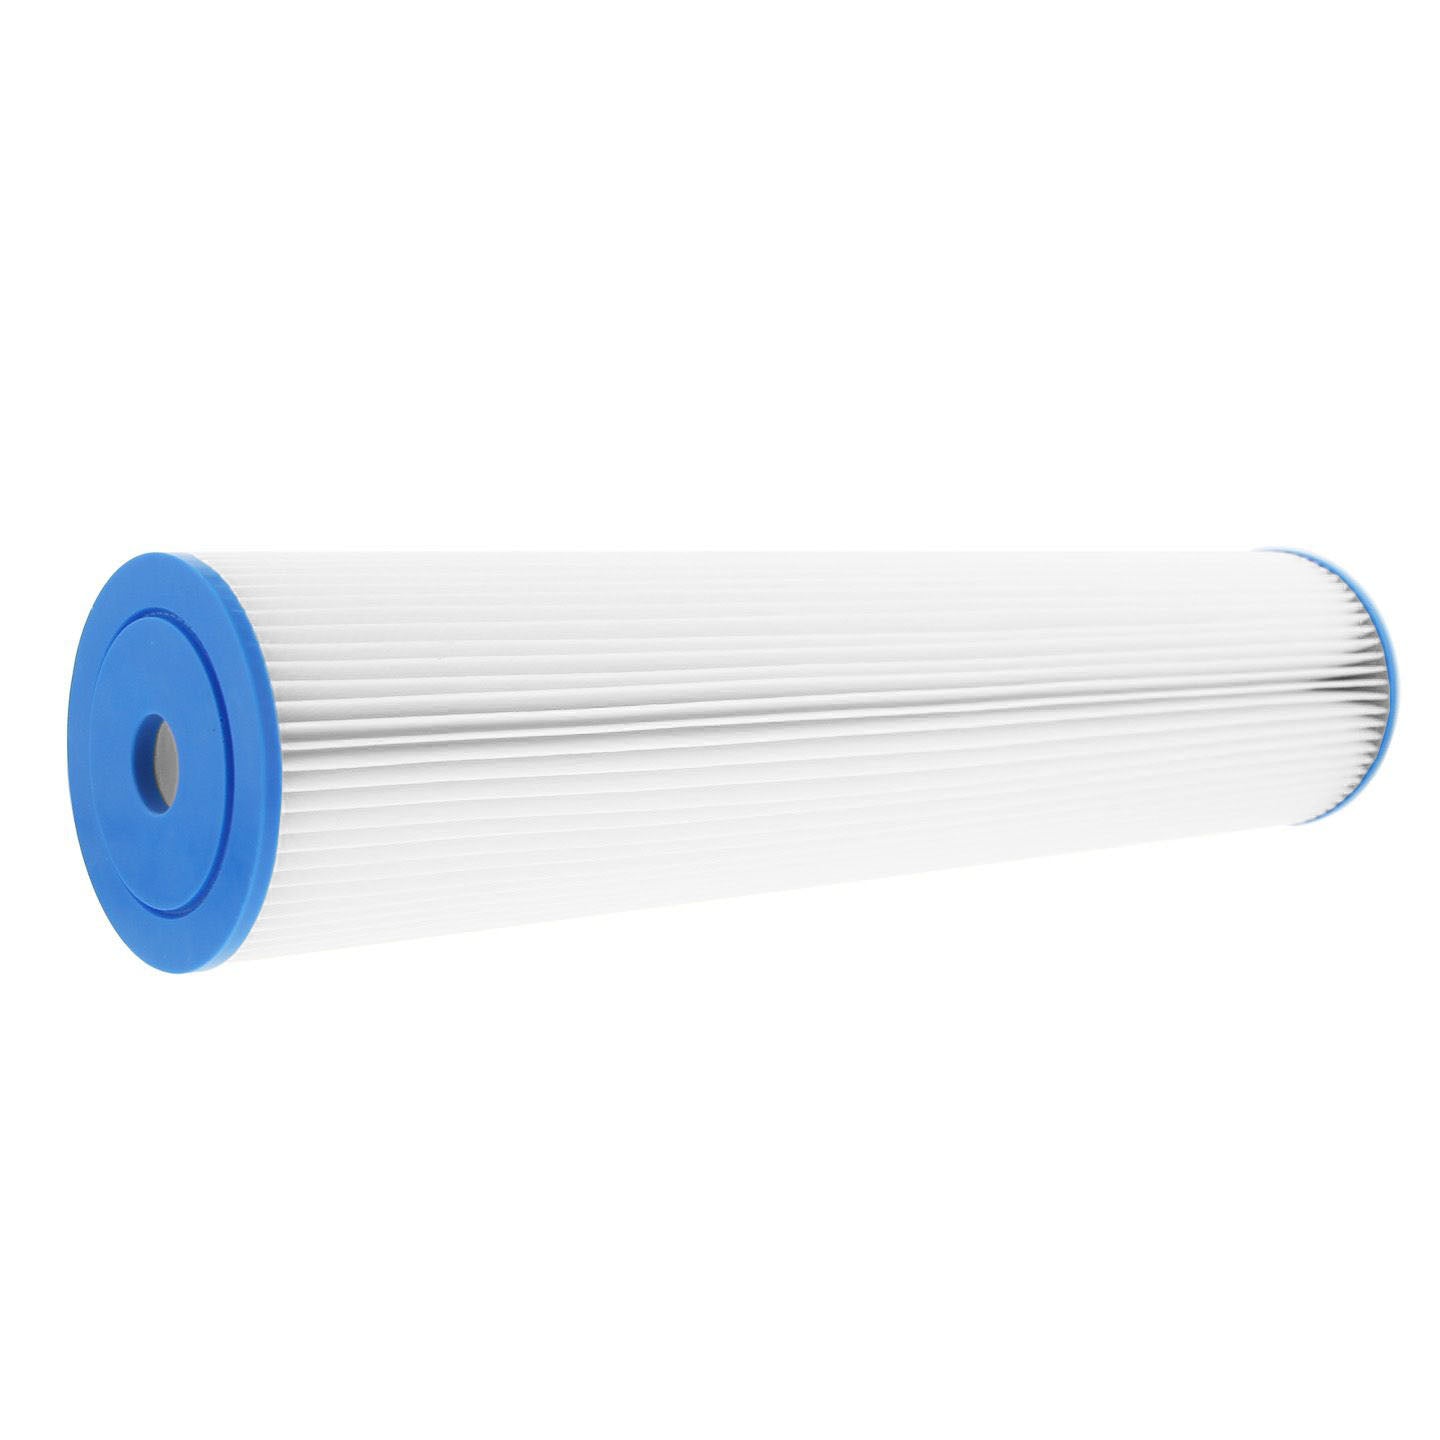 50 Micron Pleated Polyester Sediment Filter by USWF 20"x4.5"